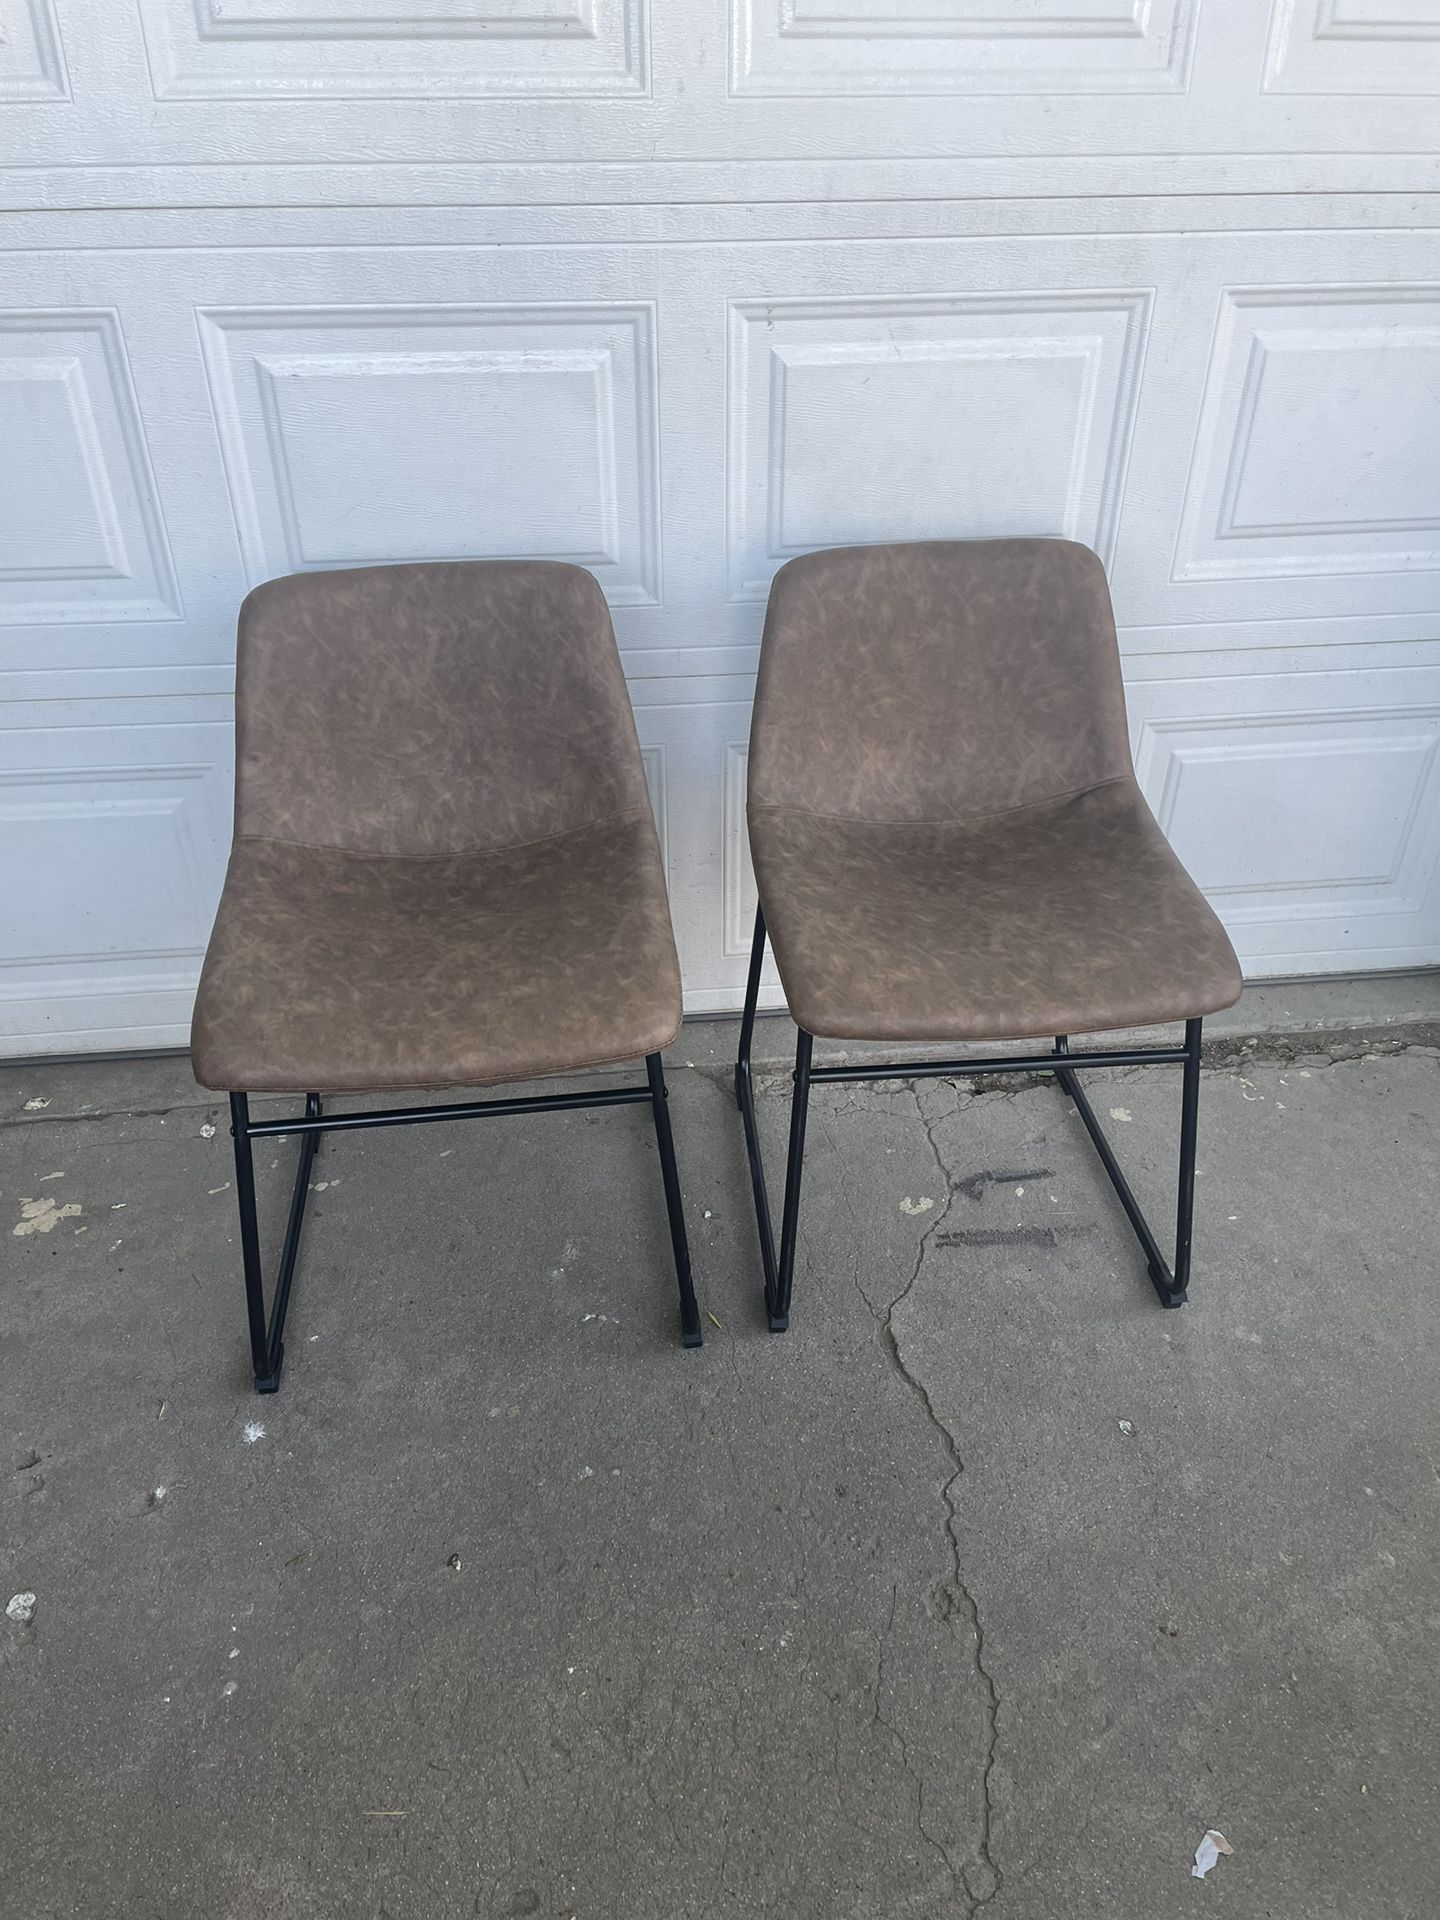 Set of 2 Mid-Century Modern Kitchen Chairs with Back, Metal Legs, Comfortable Wide Seat, Faux Leather Cover, 264lb Load Capacity, Retro Brown and Blac